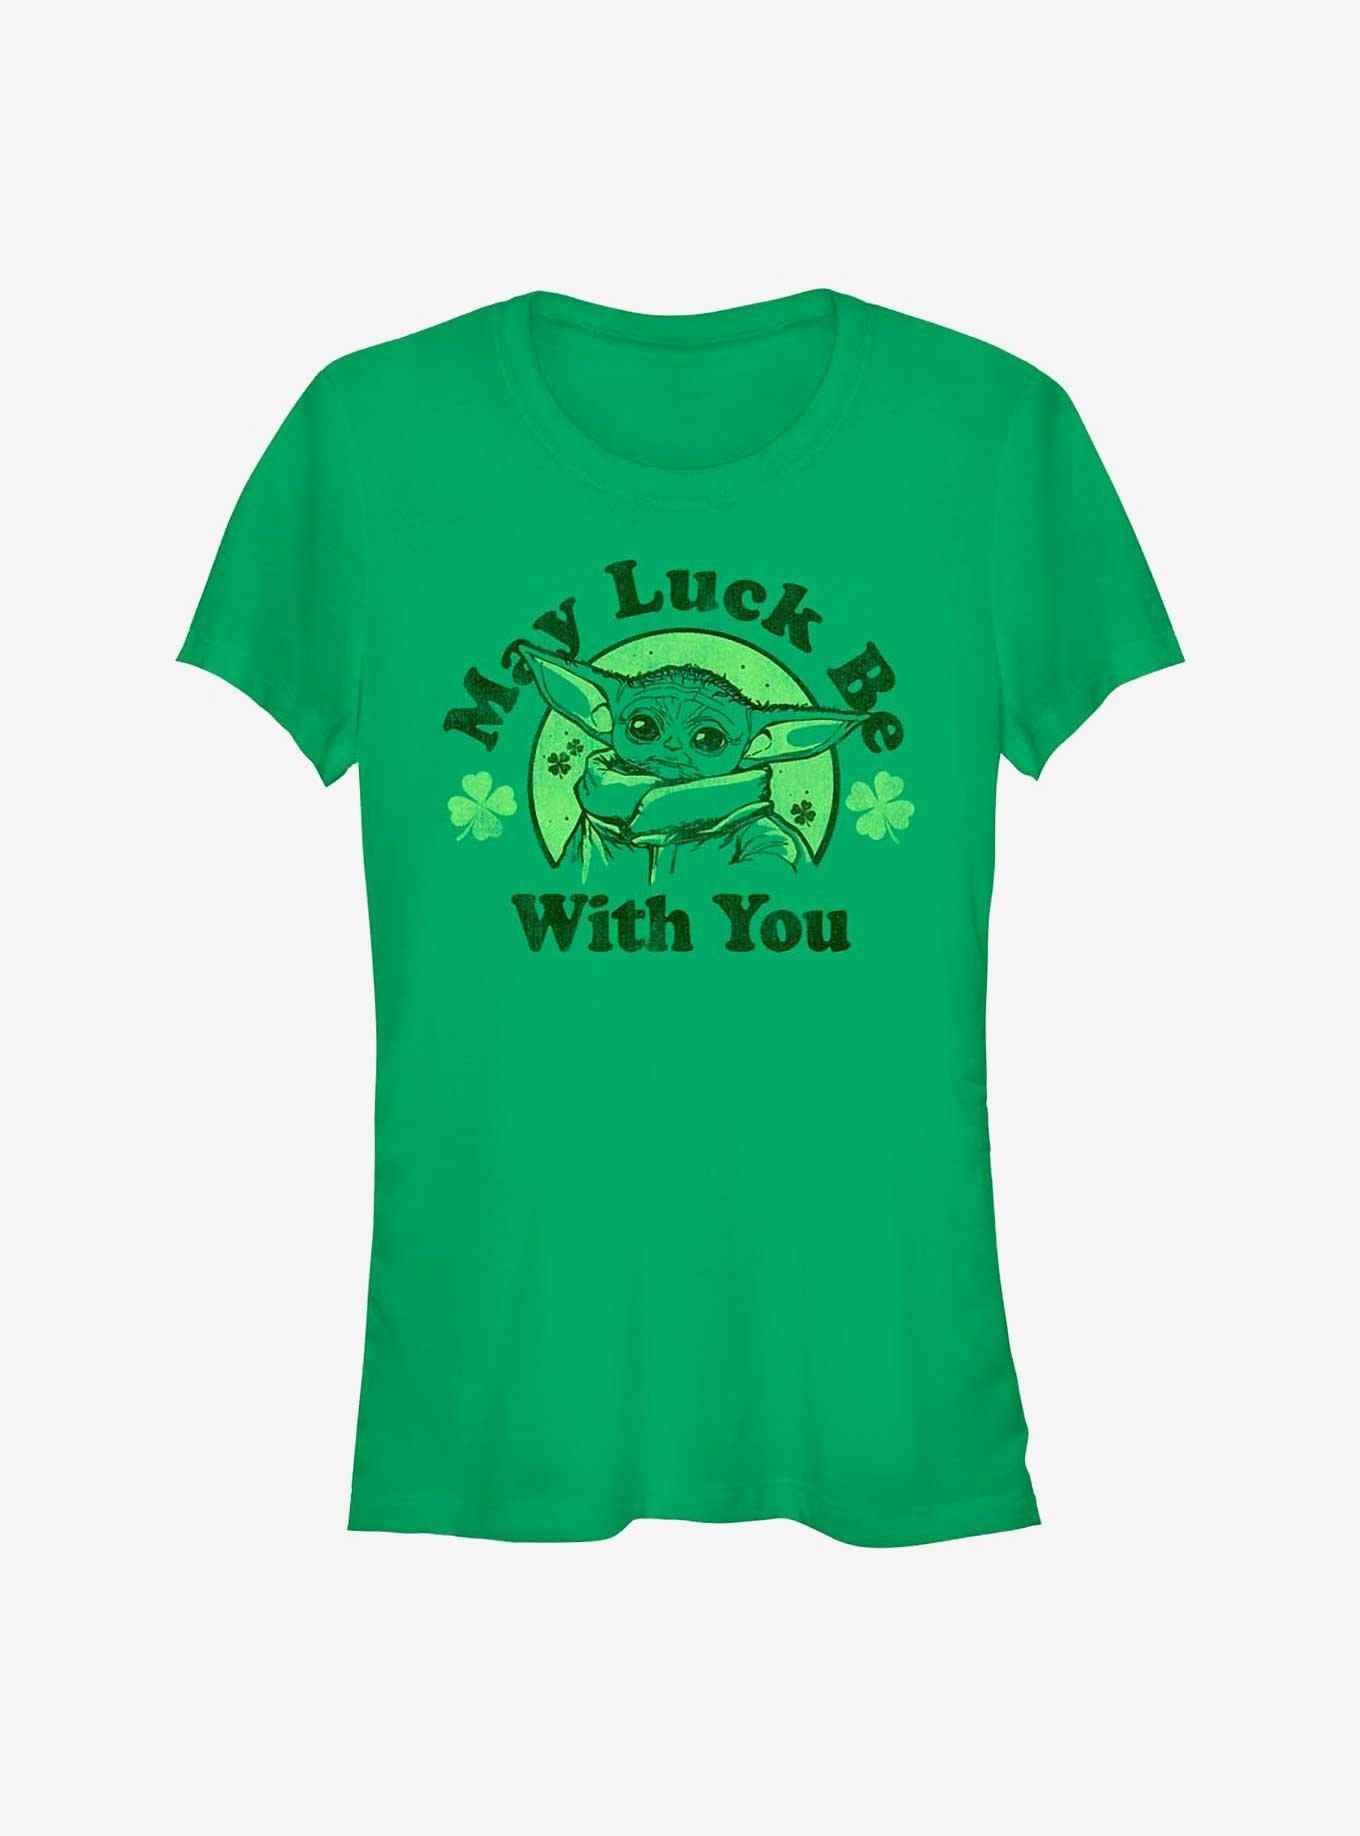 Star Wars The Mandalorian May You Have Luck Girls T-Shirt